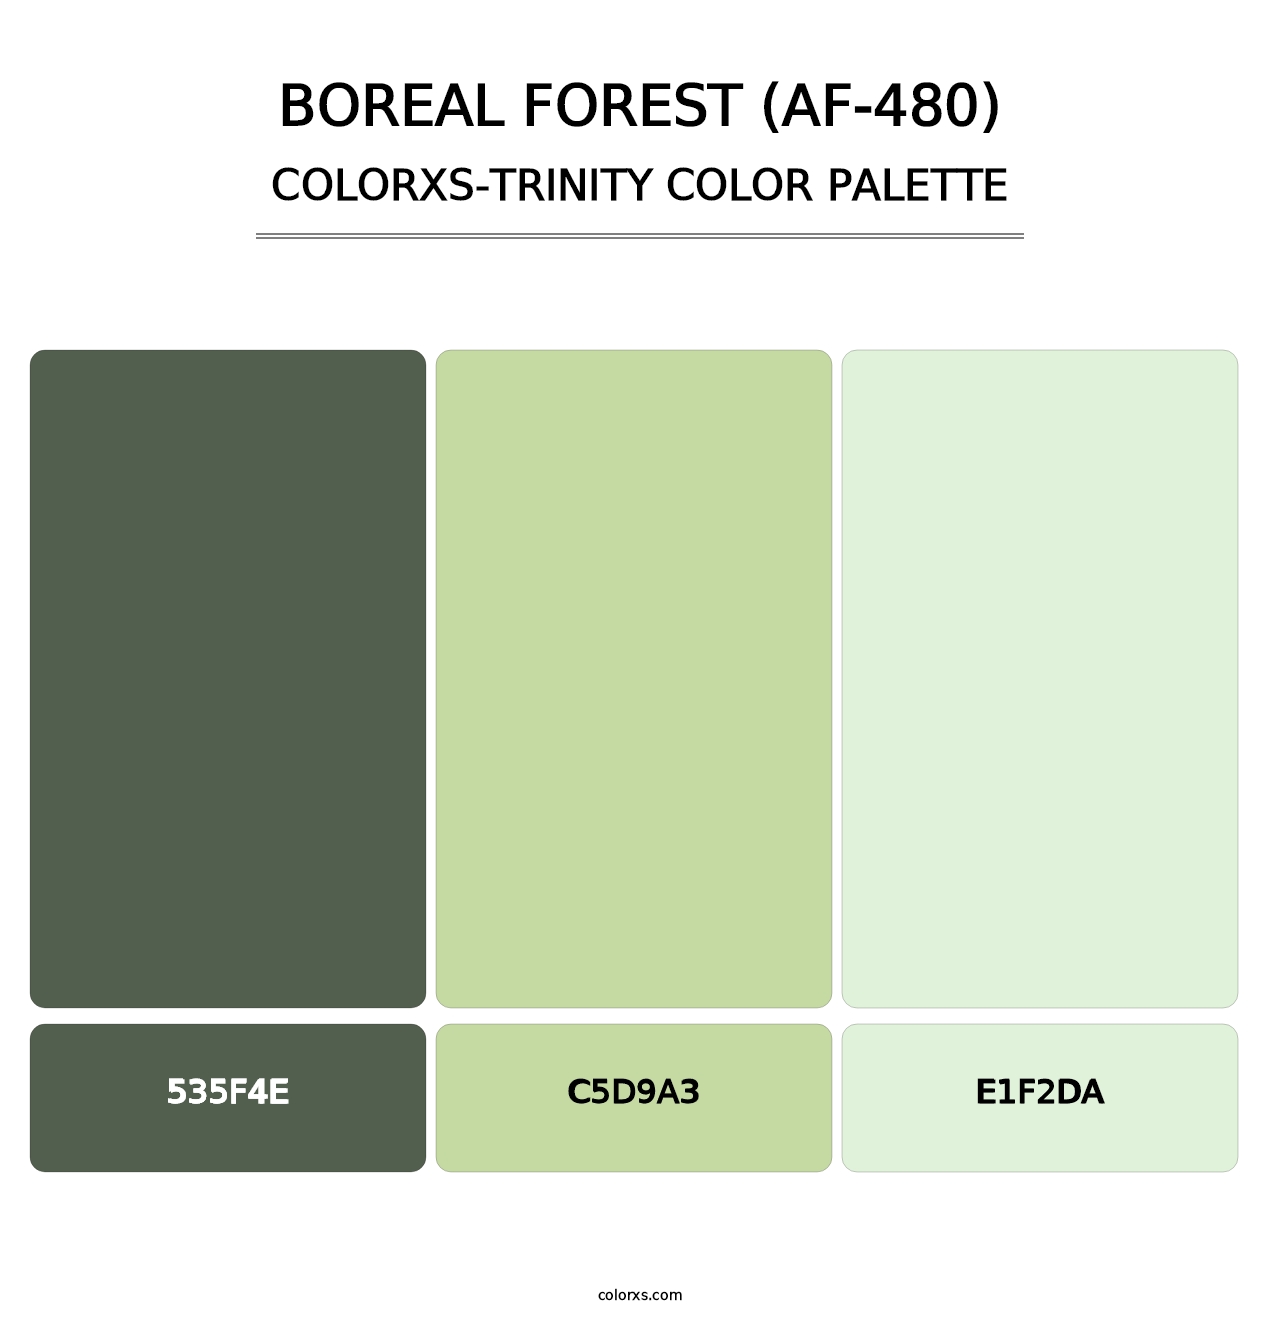 Boreal Forest (AF-480) - Colorxs Trinity Palette